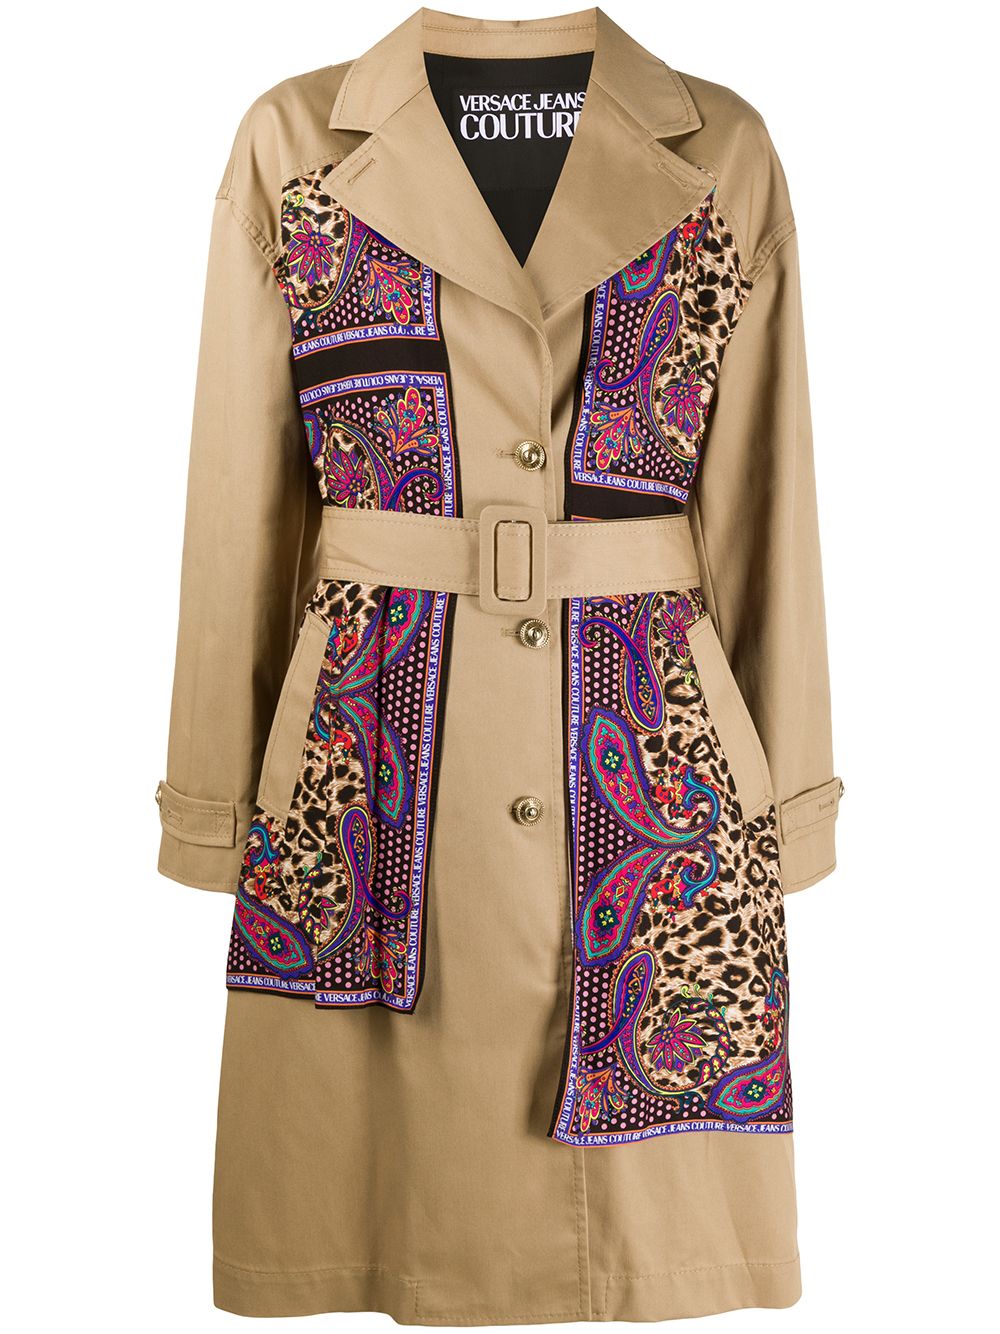 Versace Jeans Couture Trenchcoat mit Muster - Nude von Versace Jeans Couture